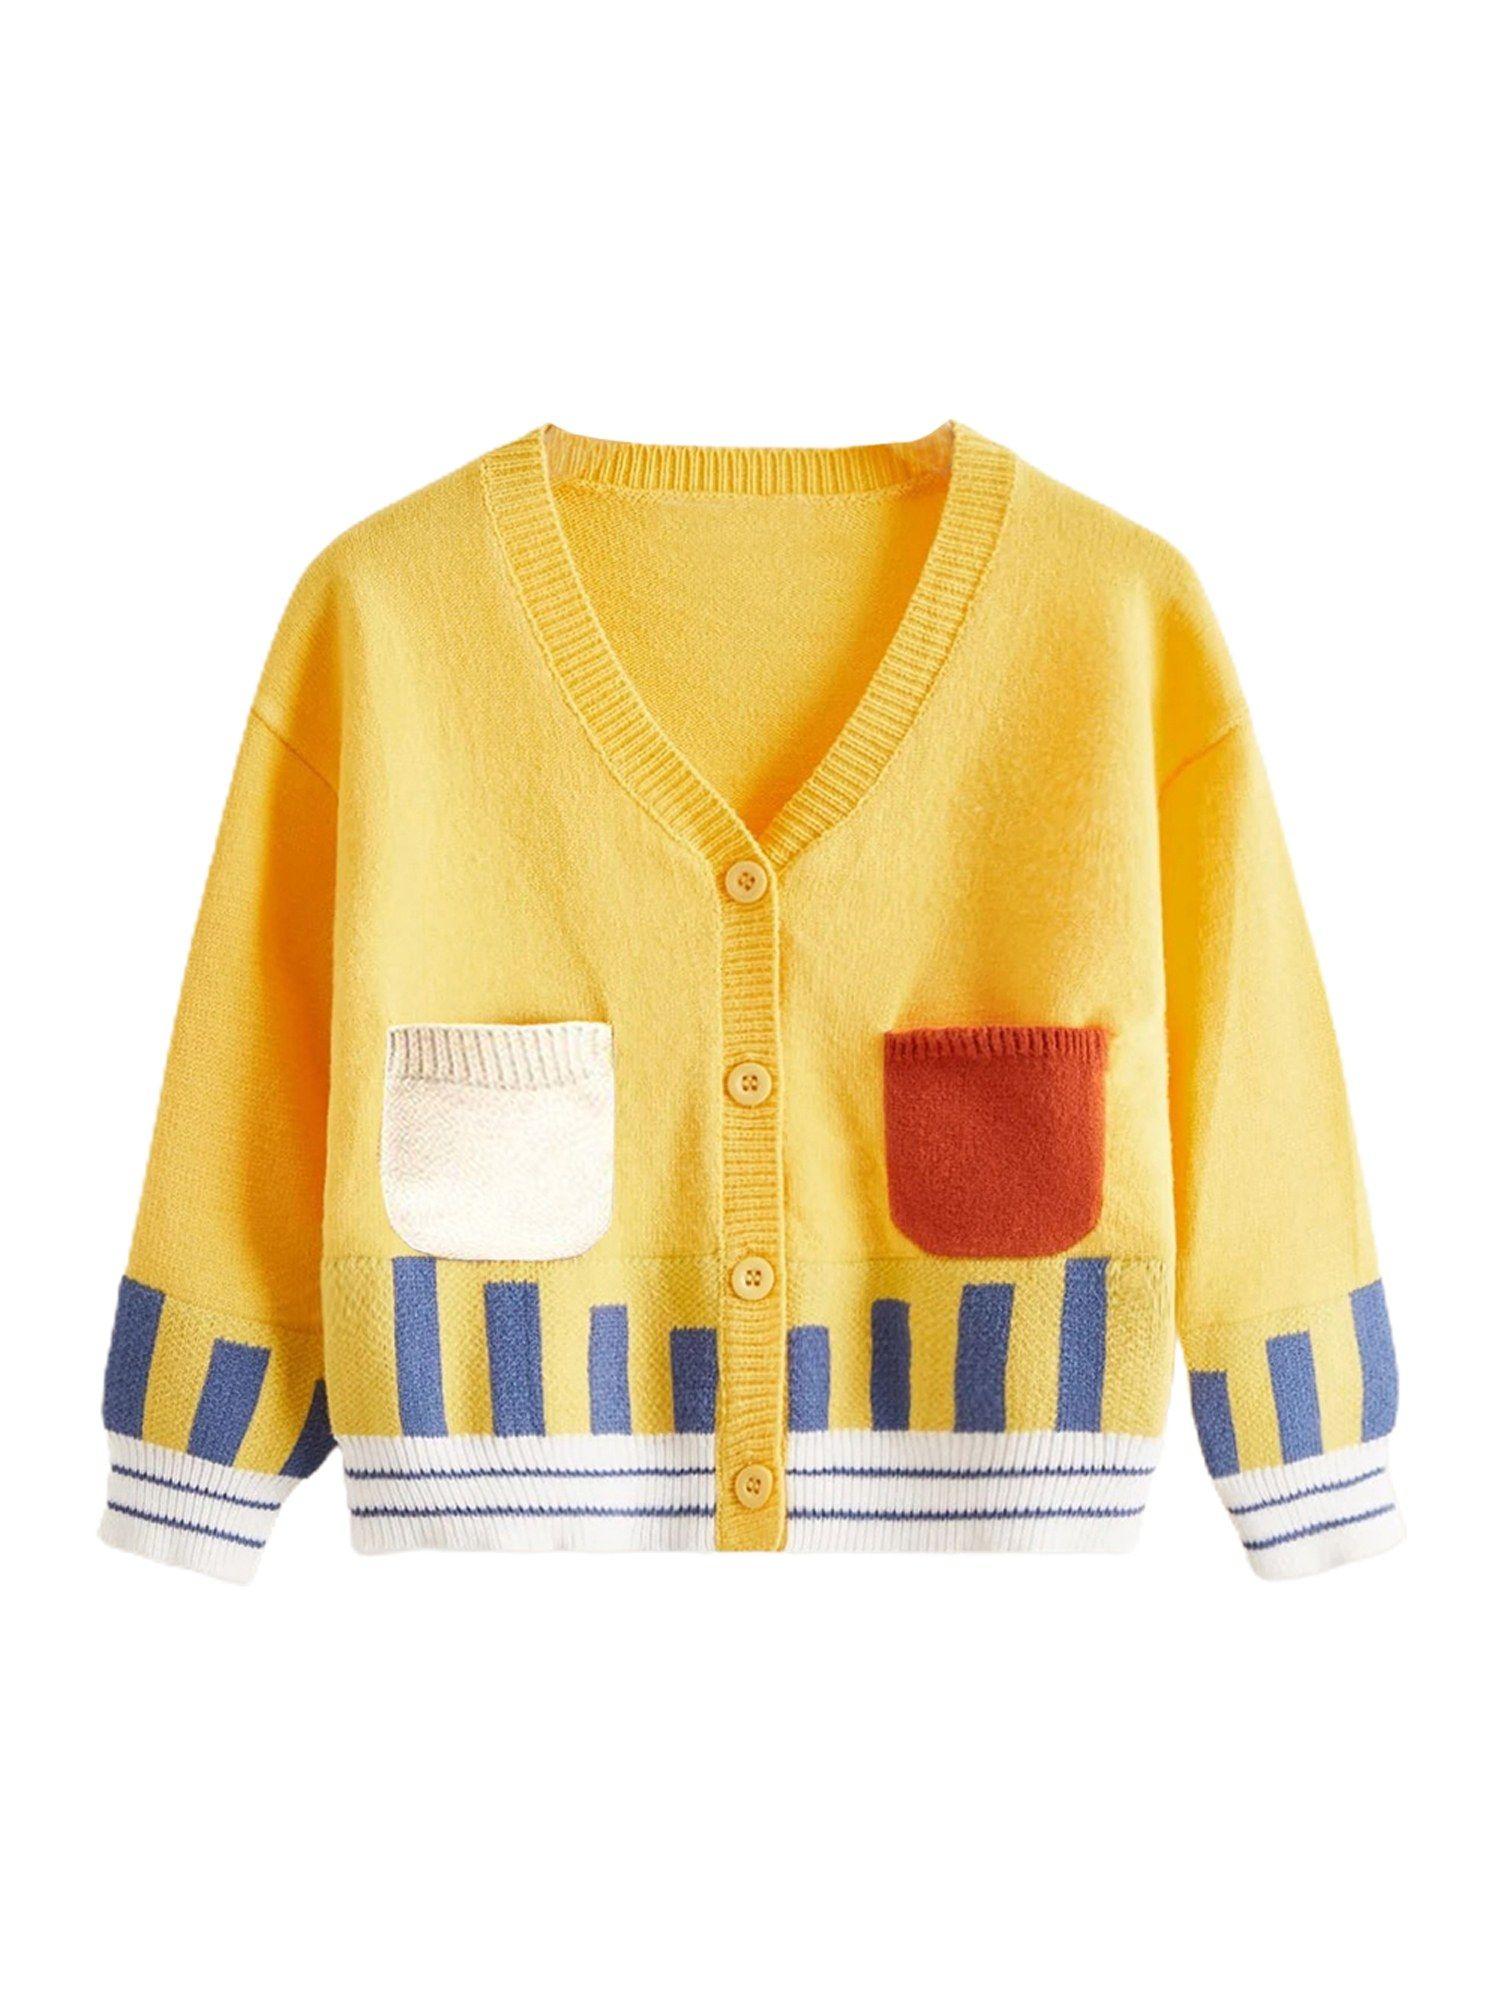 kids yellow cardigan sweater v neck with front pockets